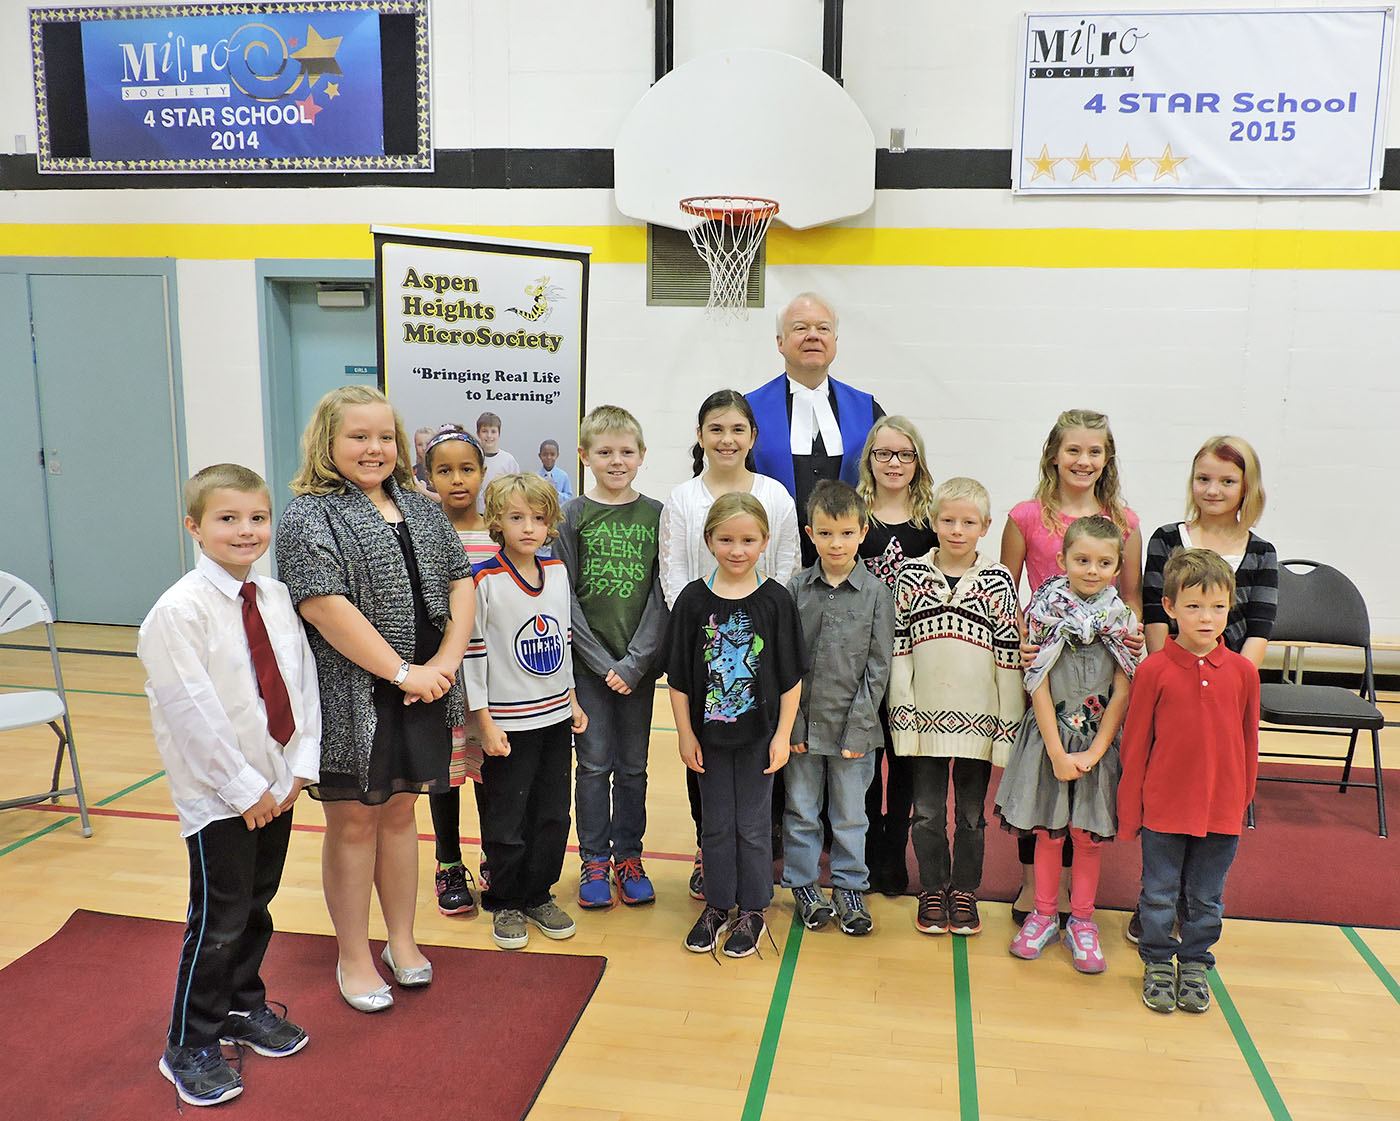 MICROSOCIETY - A group of Aspen Heights students stand with Judge Jim Mitchell at the swearing in ceremony for the MicroSociety. The school was recently honoured for its MicroSociety.